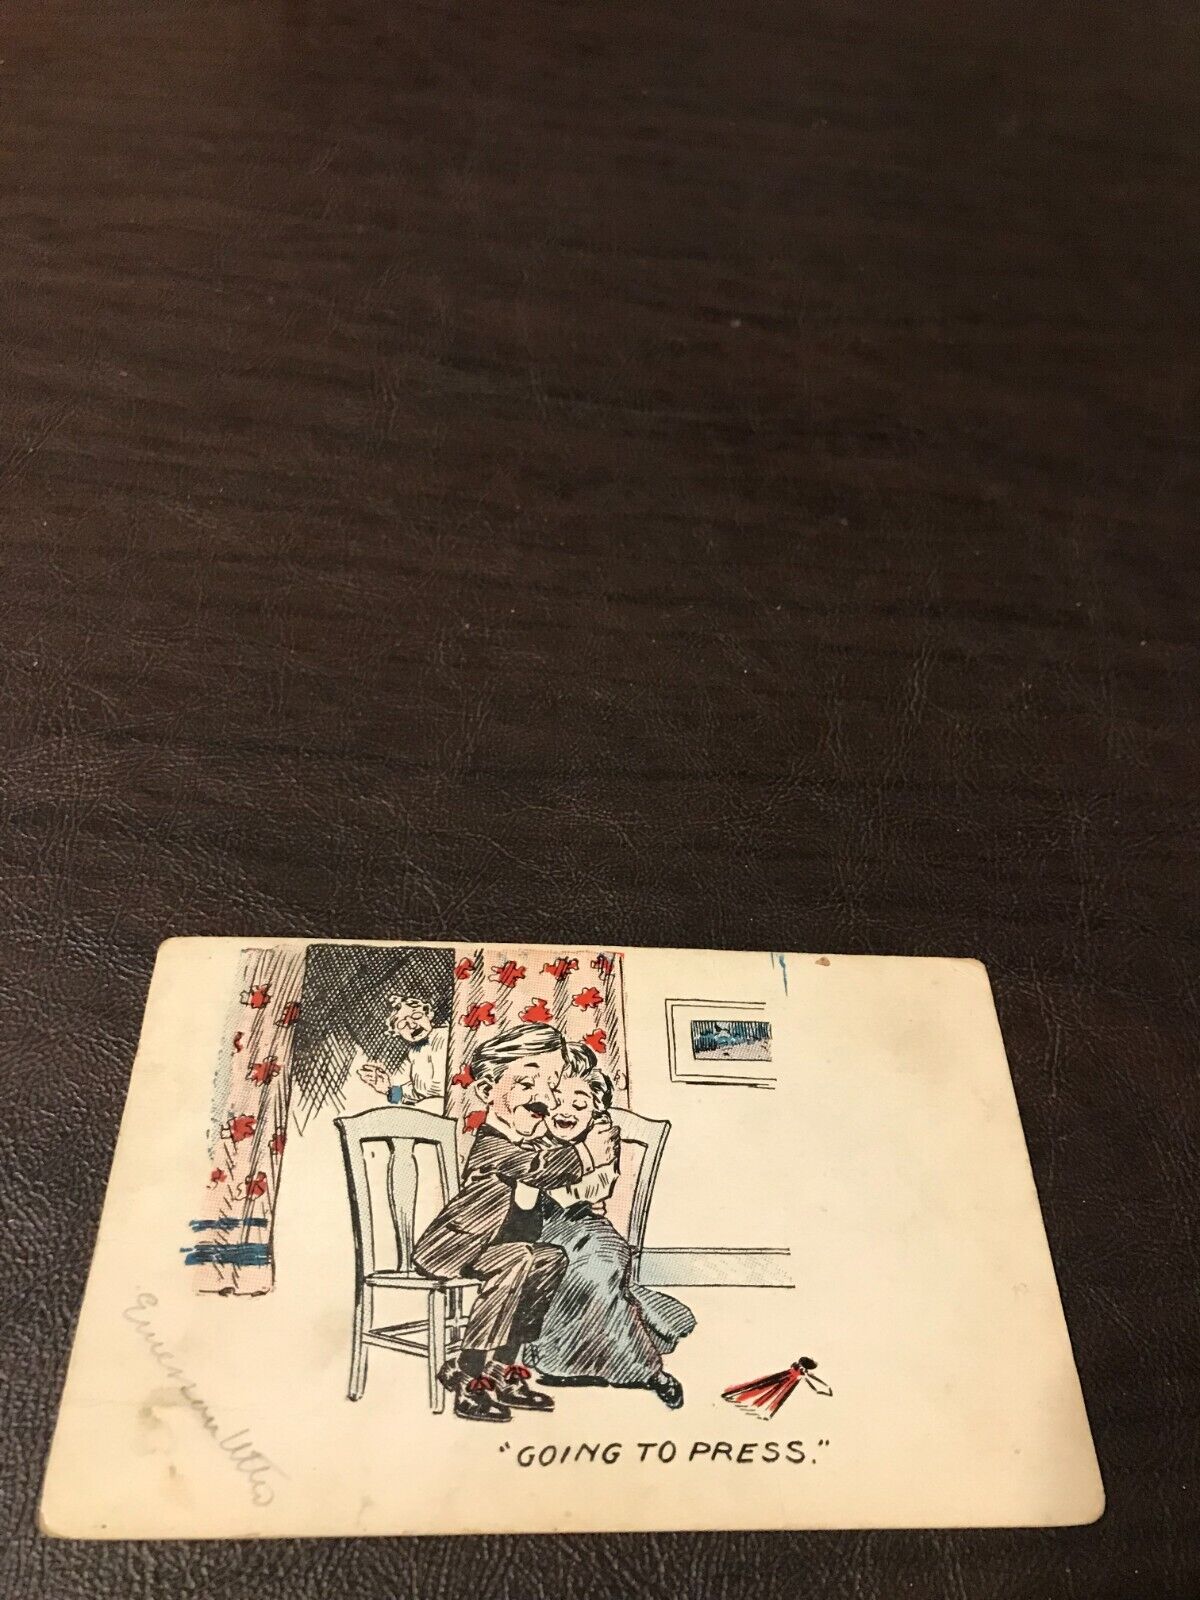 EARLY HUMOR -1907- POSTED POSTCARD - GOING TO PRESS